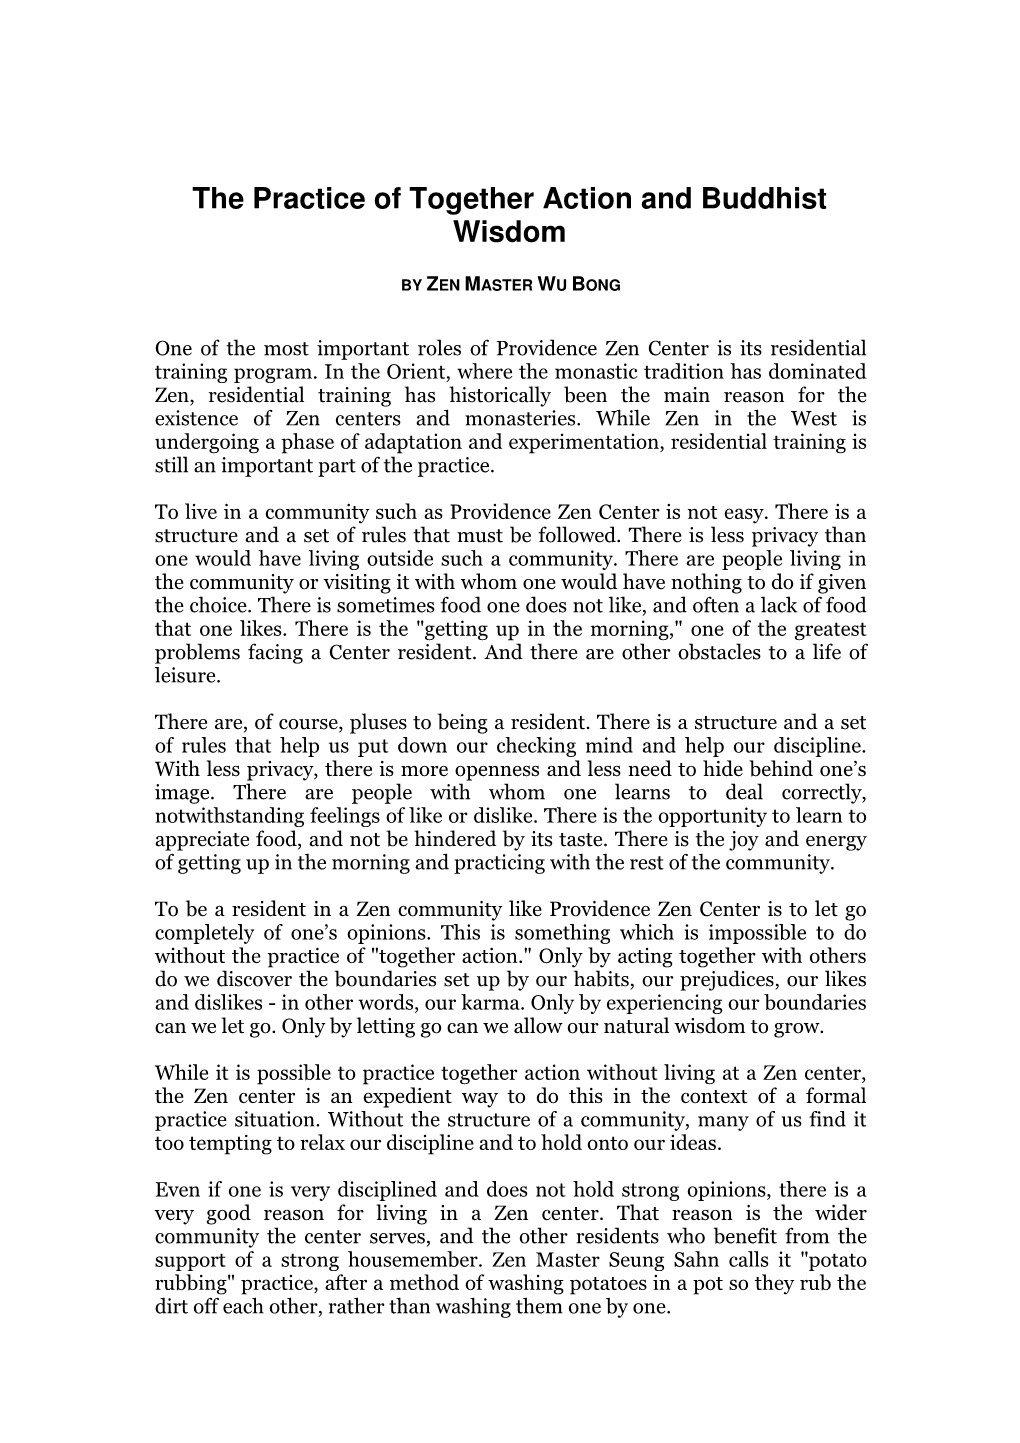 The Practice of Together Action and Buddhist Wisdom